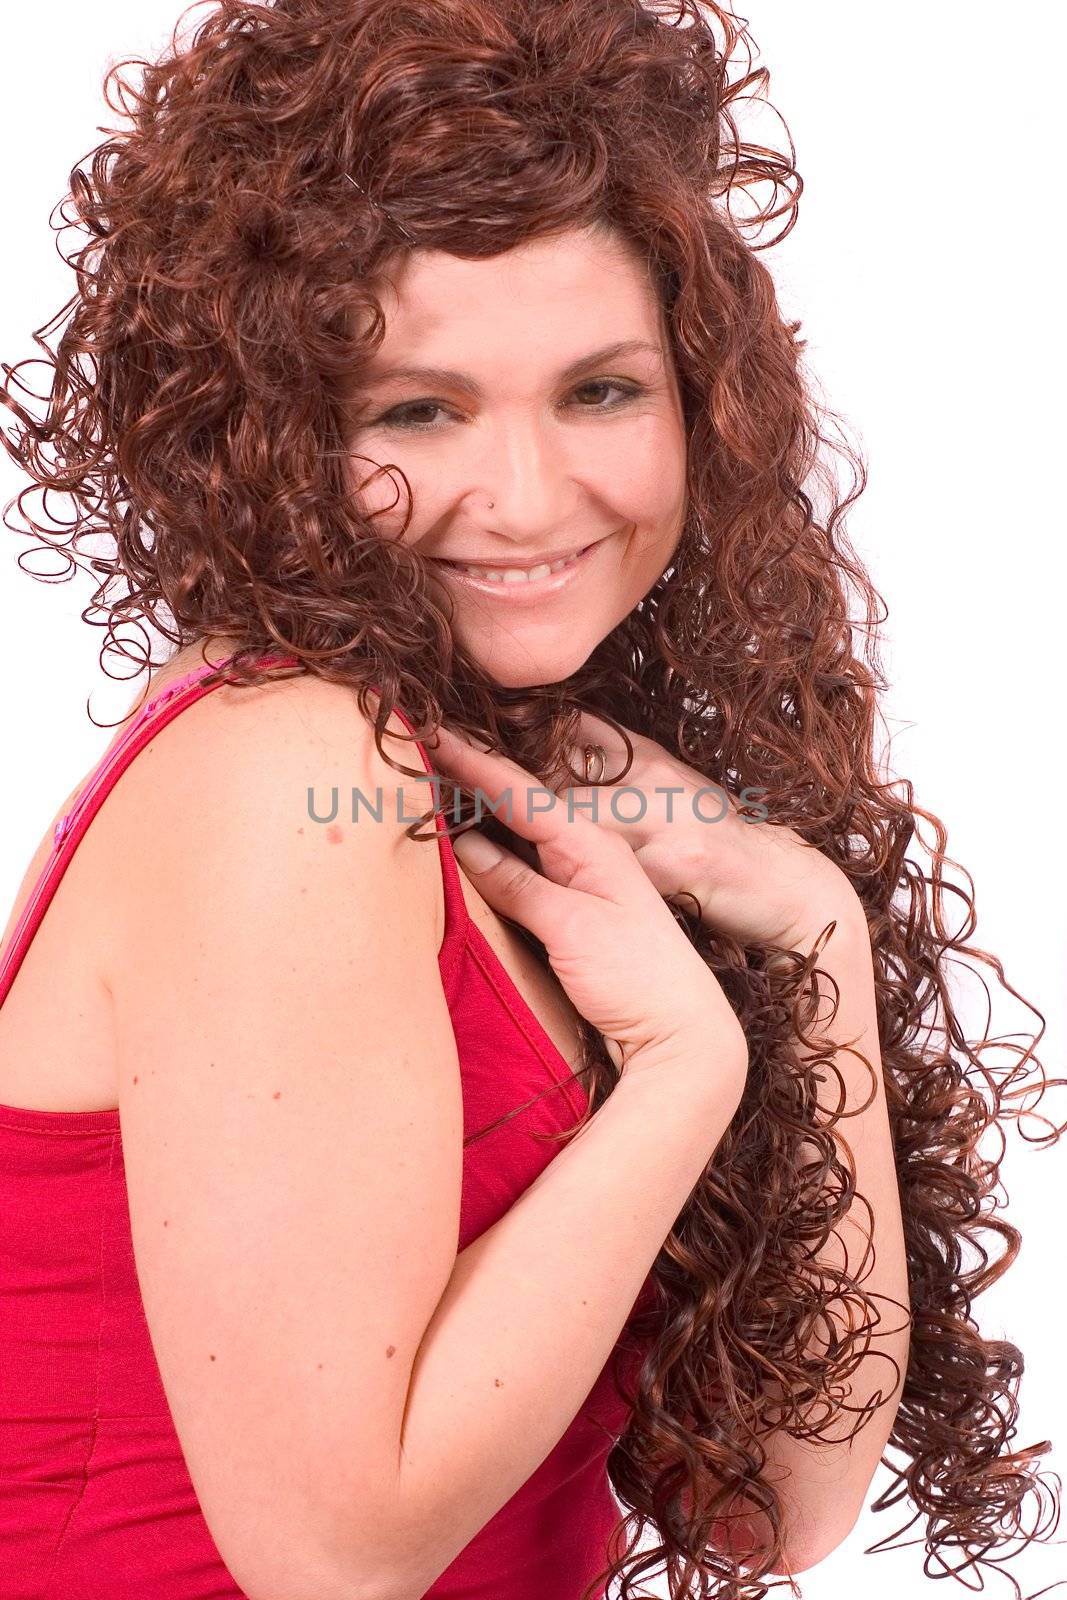 Beautiful young woman with long red curly hair